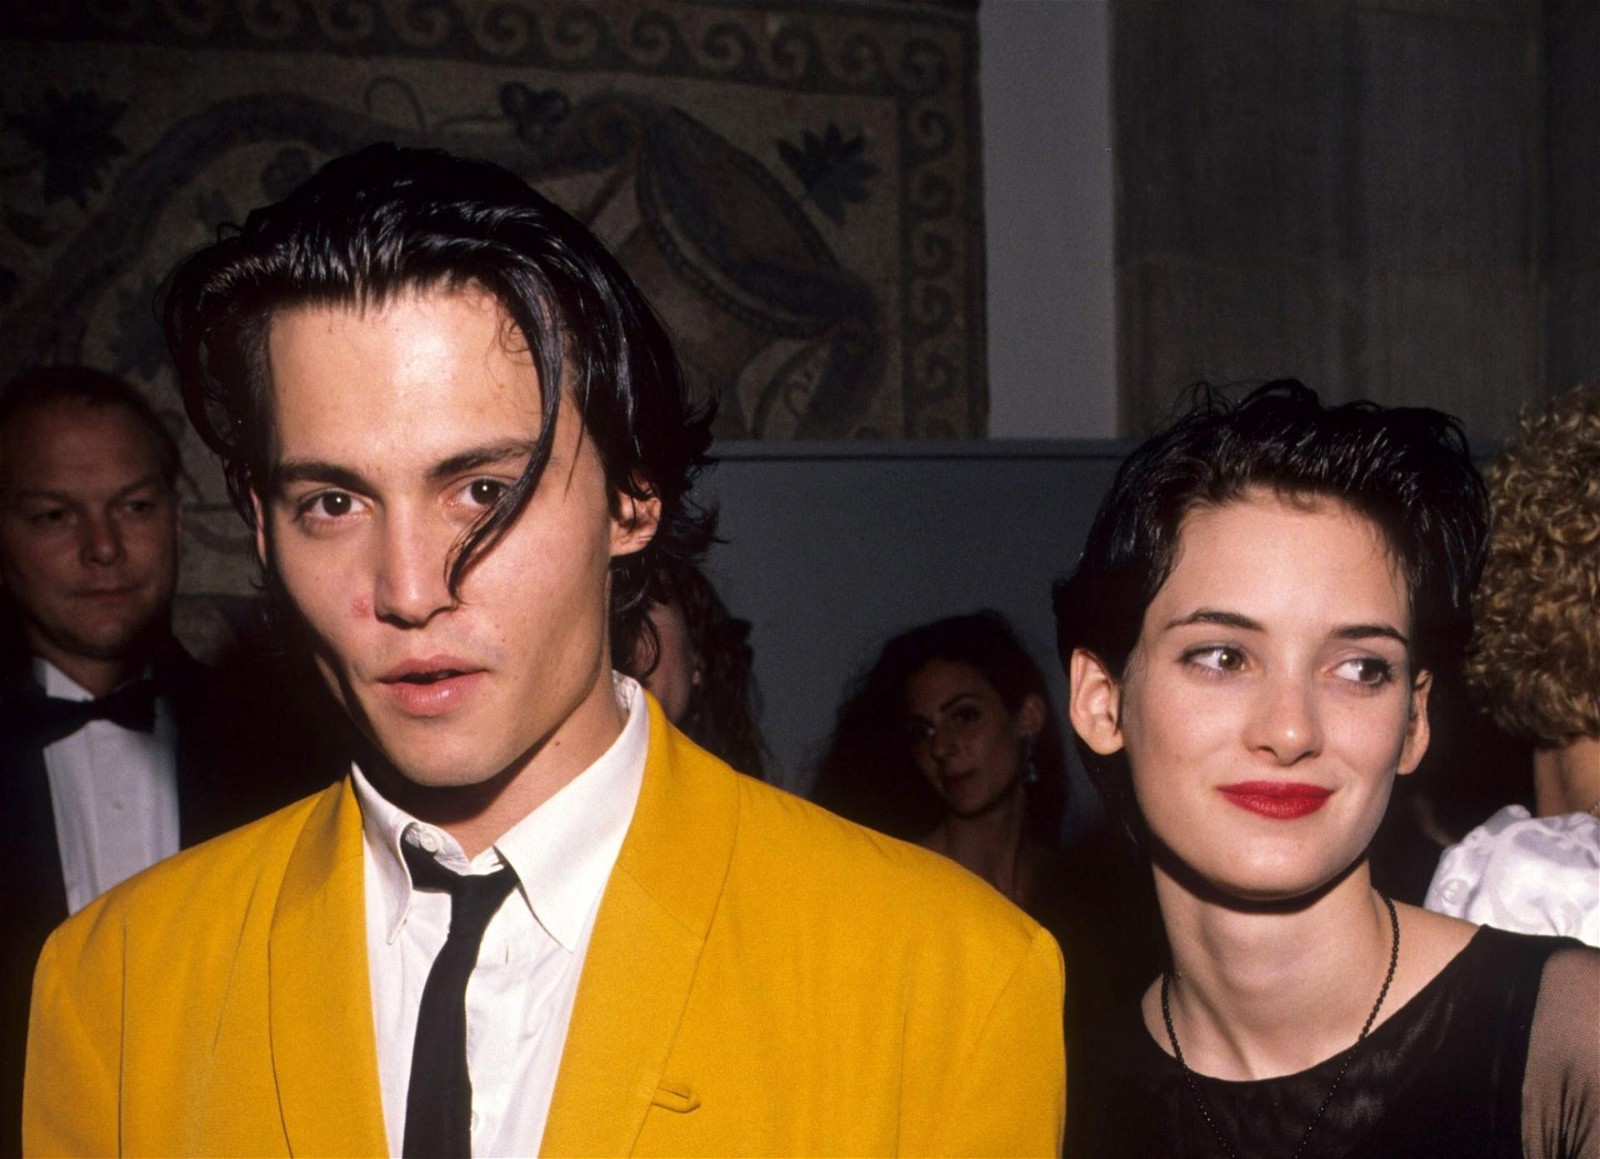 Johnny Depp & Winona Ryder in the early '90s